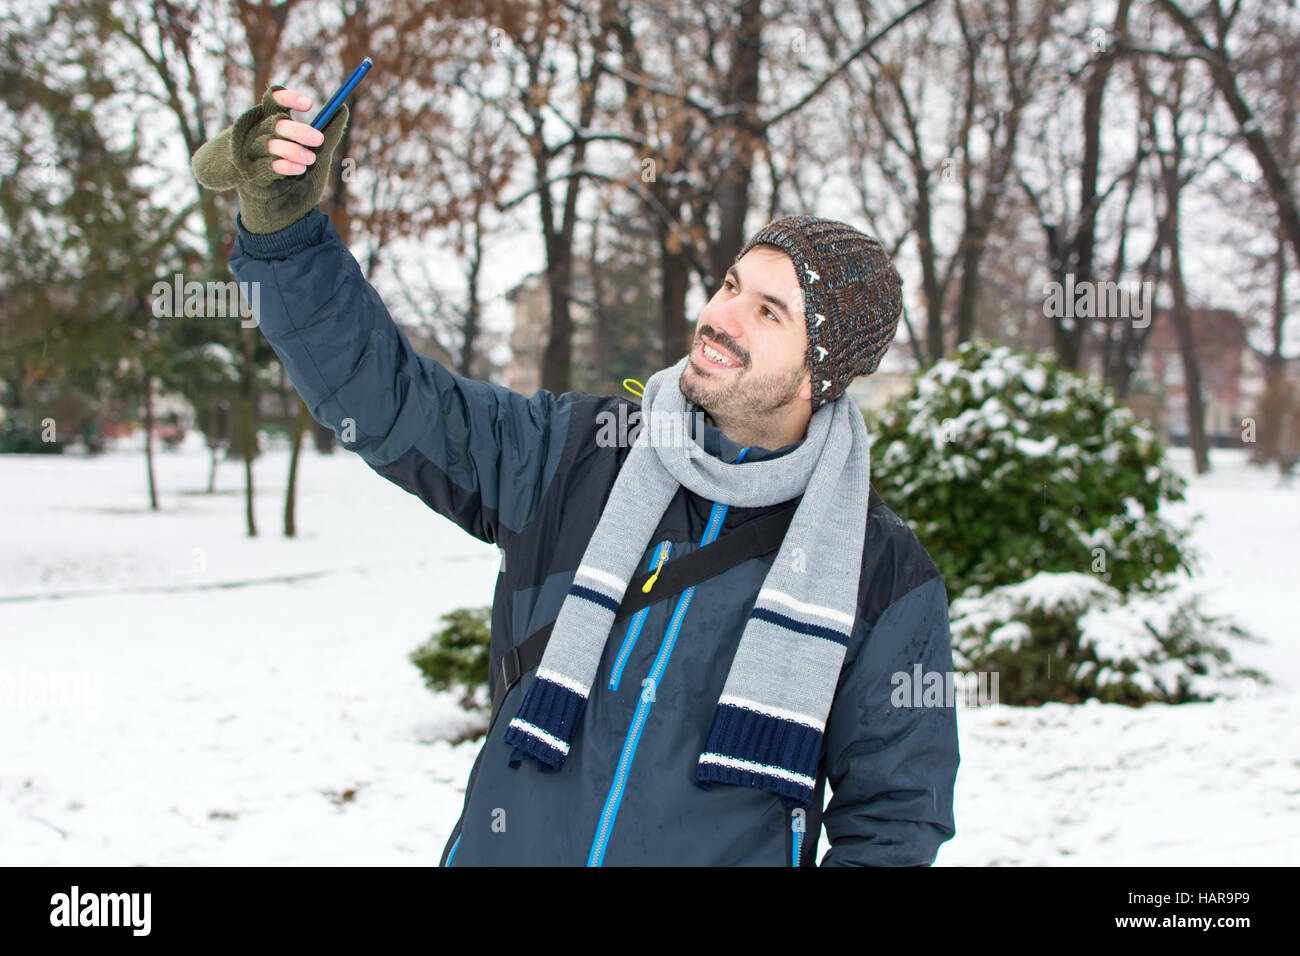 Man talking a selfie in snow covered park Stock Photo